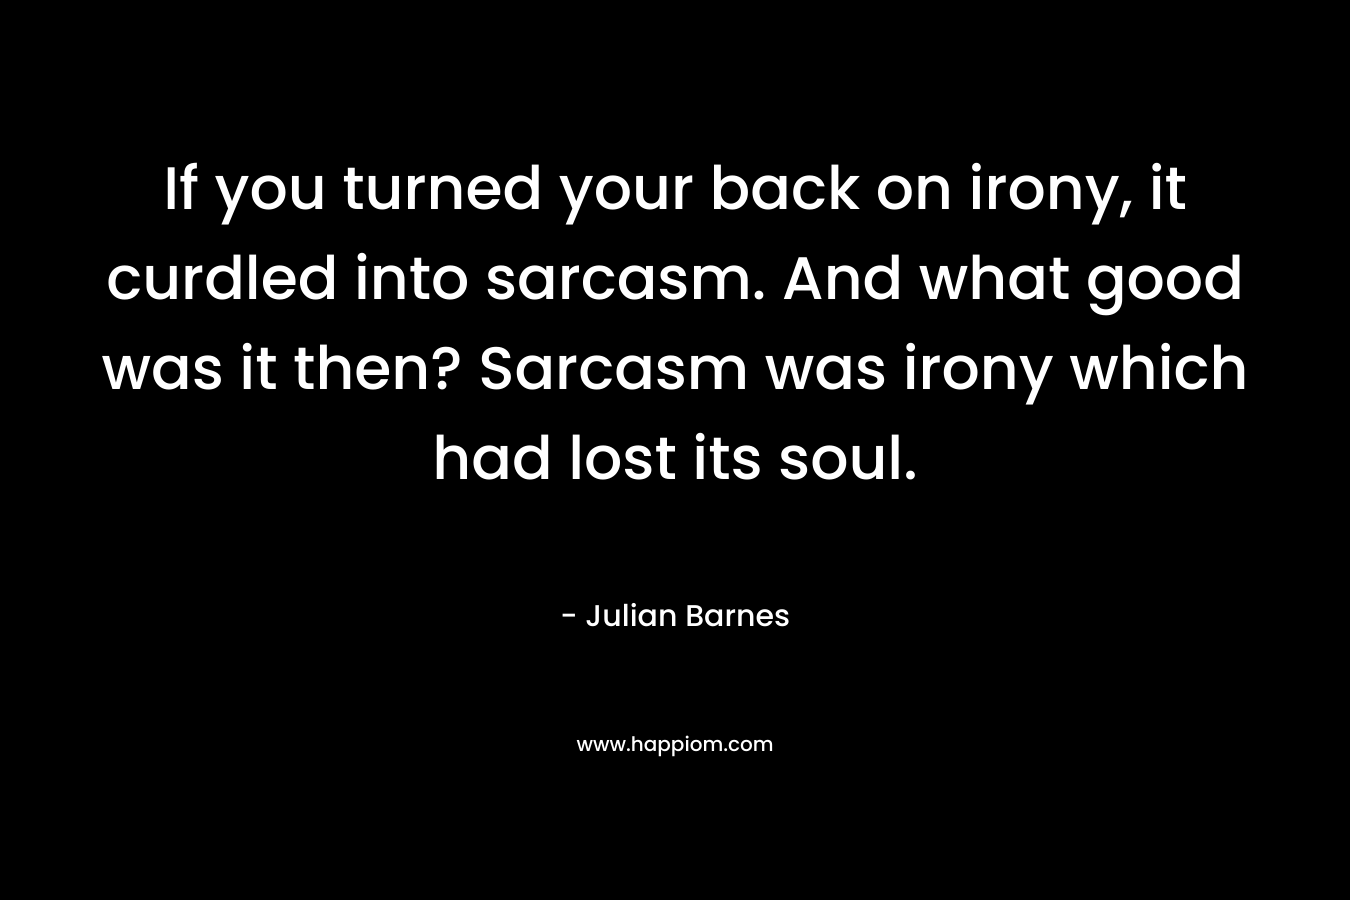 If you turned your back on irony, it curdled into sarcasm. And what good was it then? Sarcasm was irony which had lost its soul.